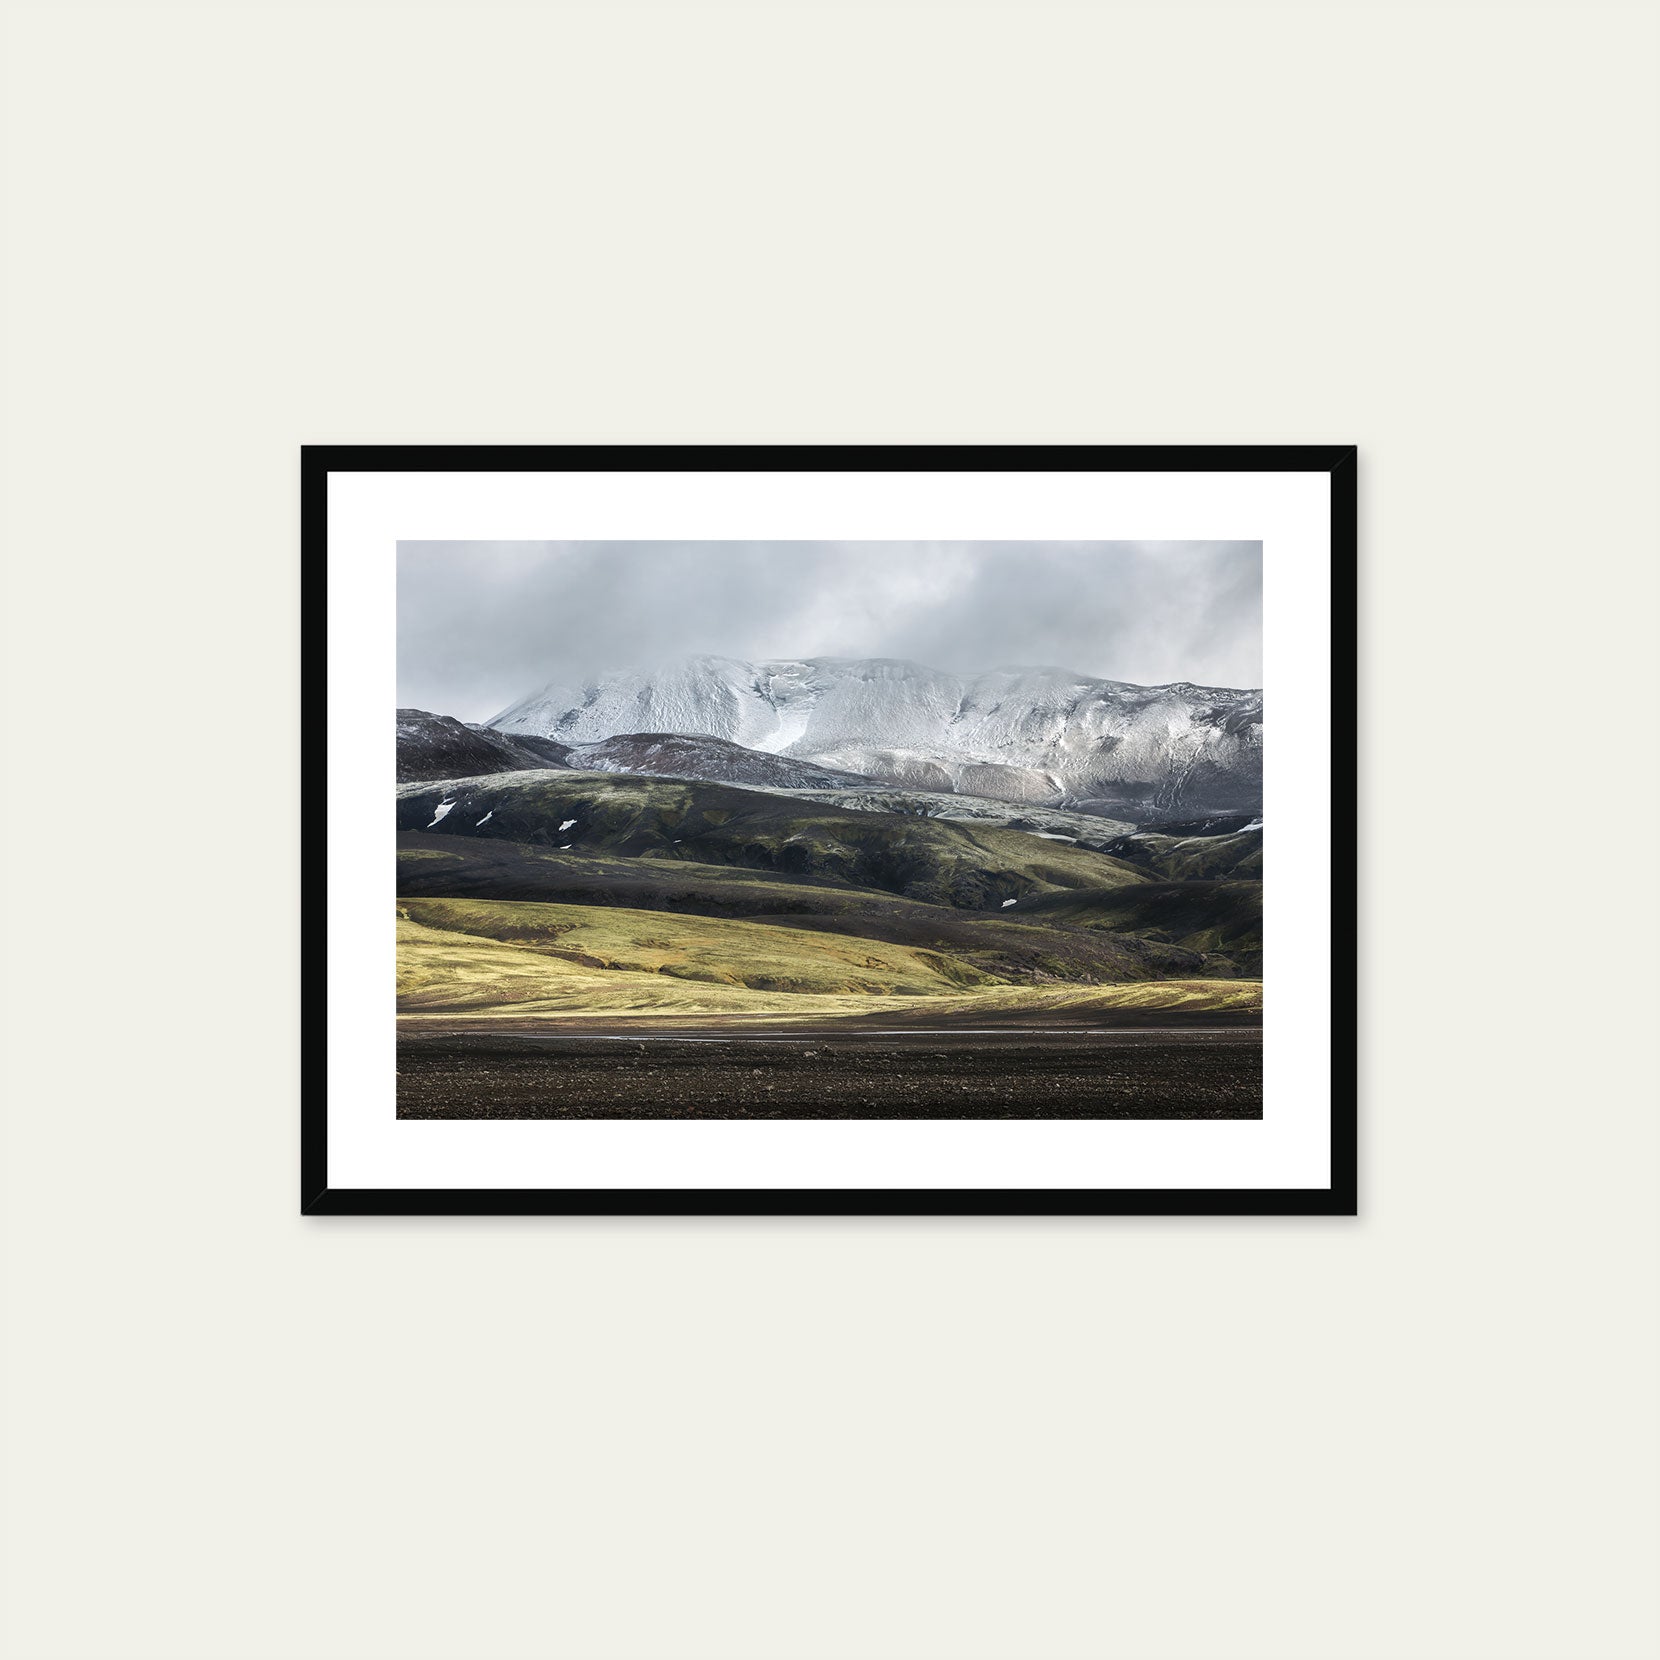 A black framed print of a mountain range in Iceland